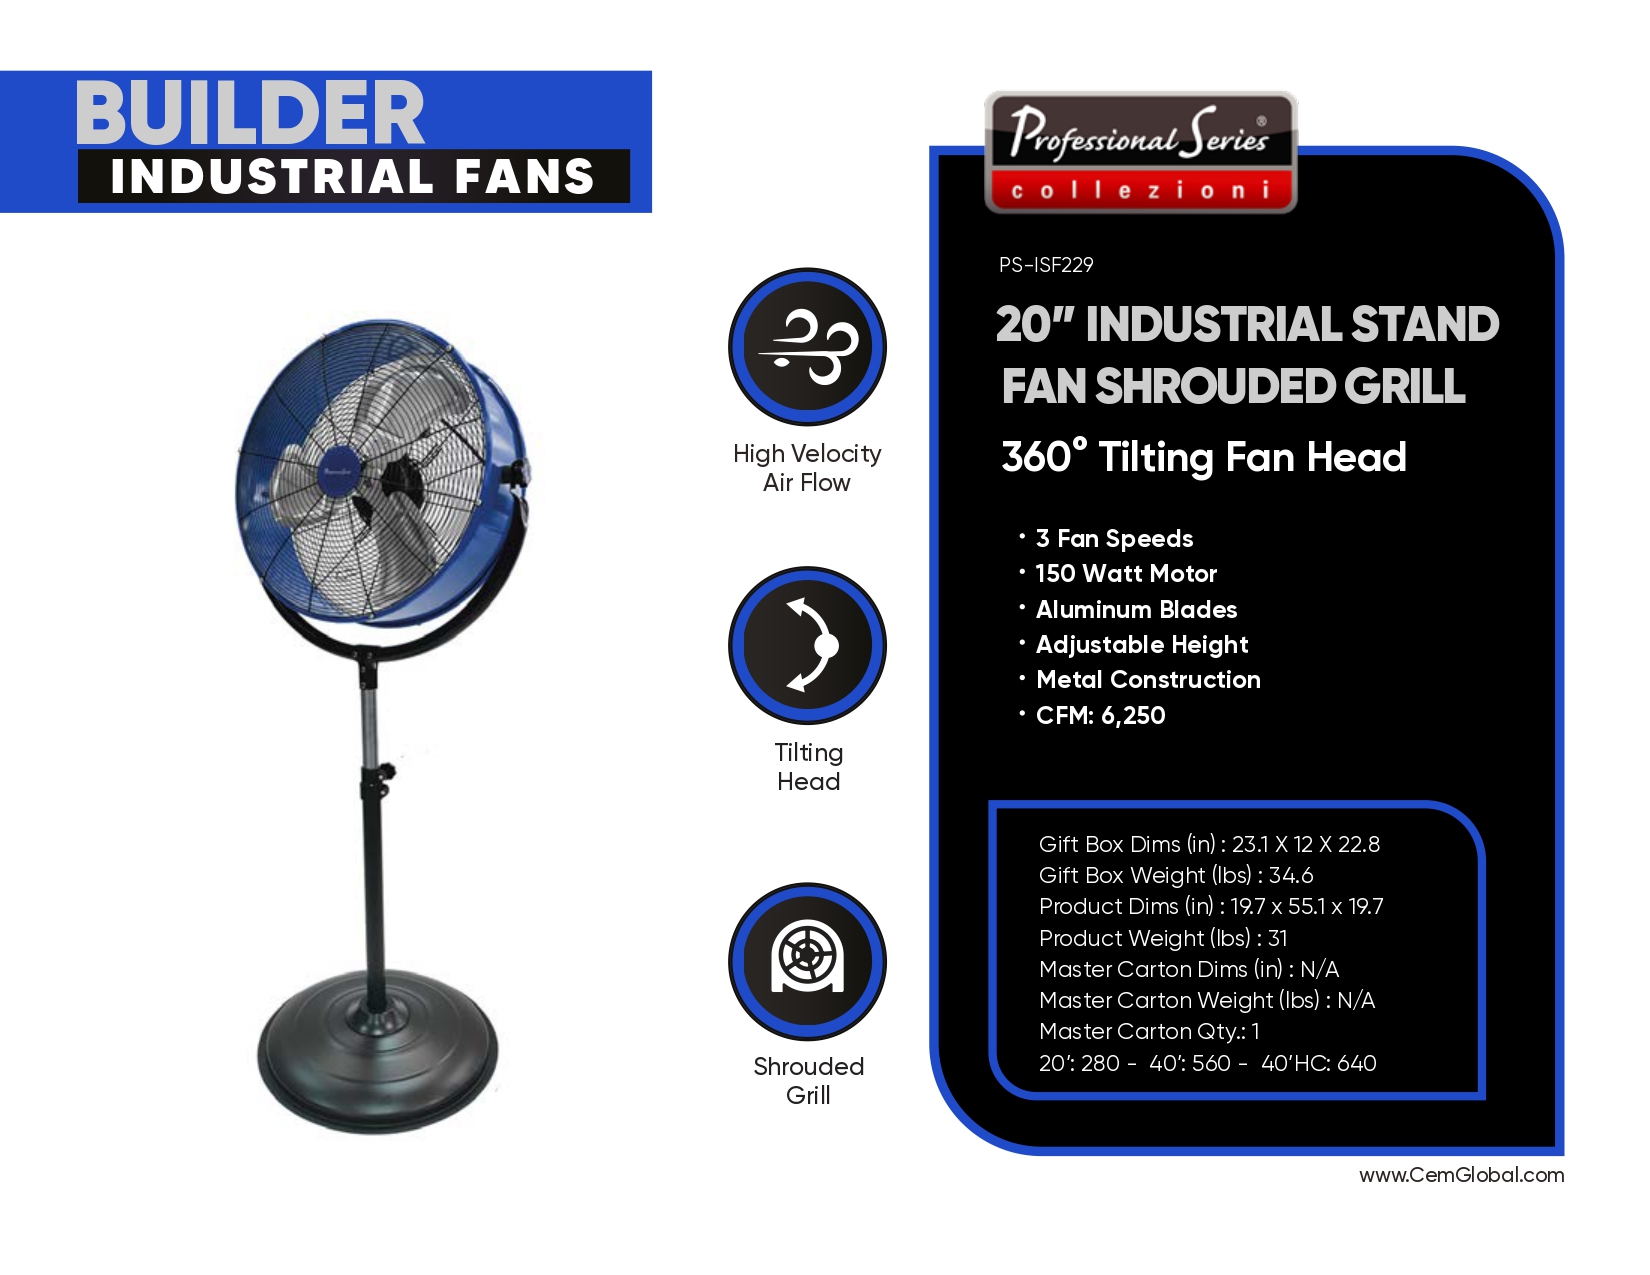 20” INDUSTRIAL STAND FAN SHROUDED GRILL